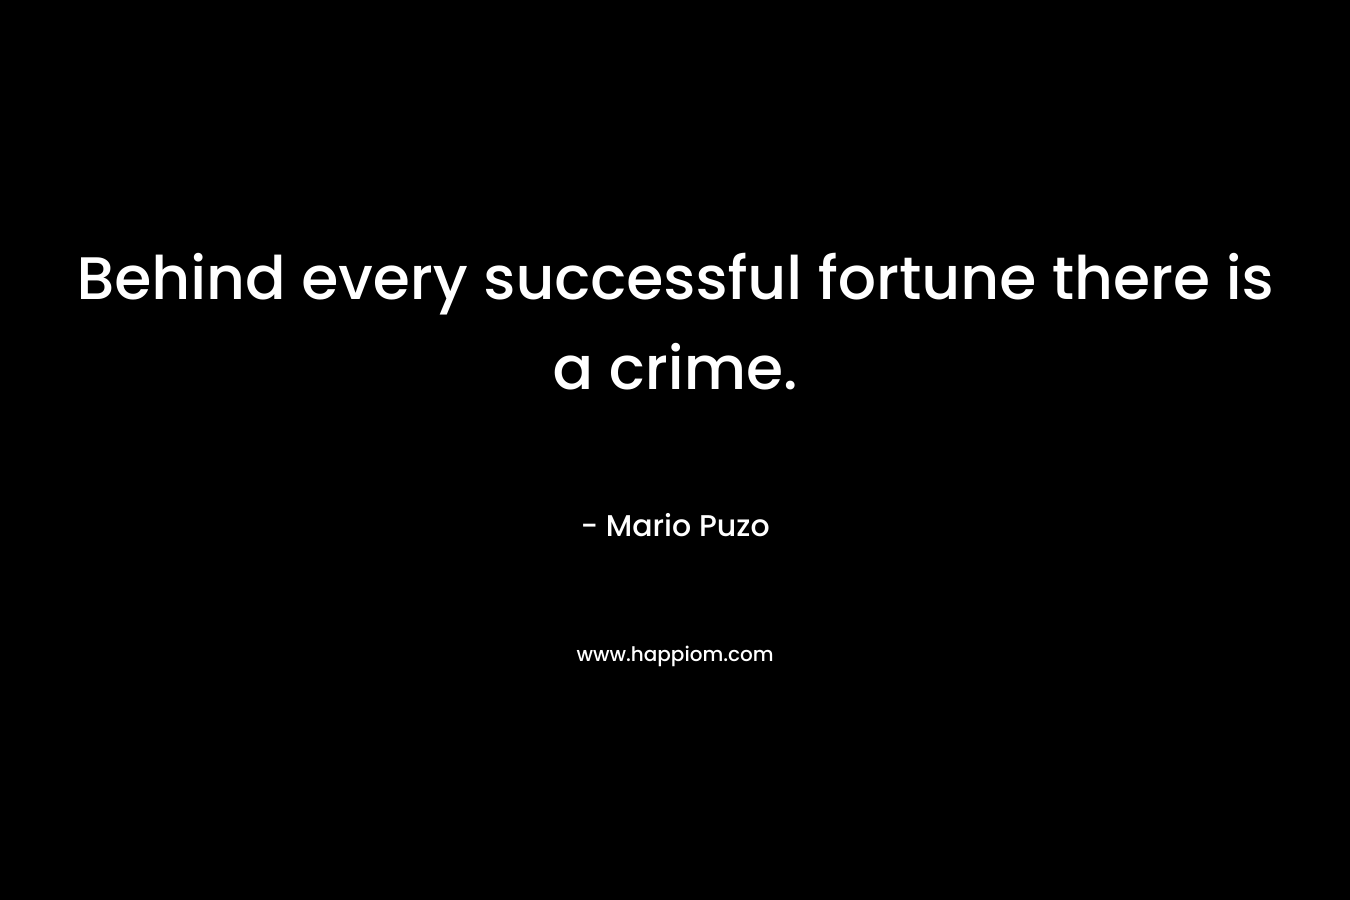 Behind every successful fortune there is a crime.